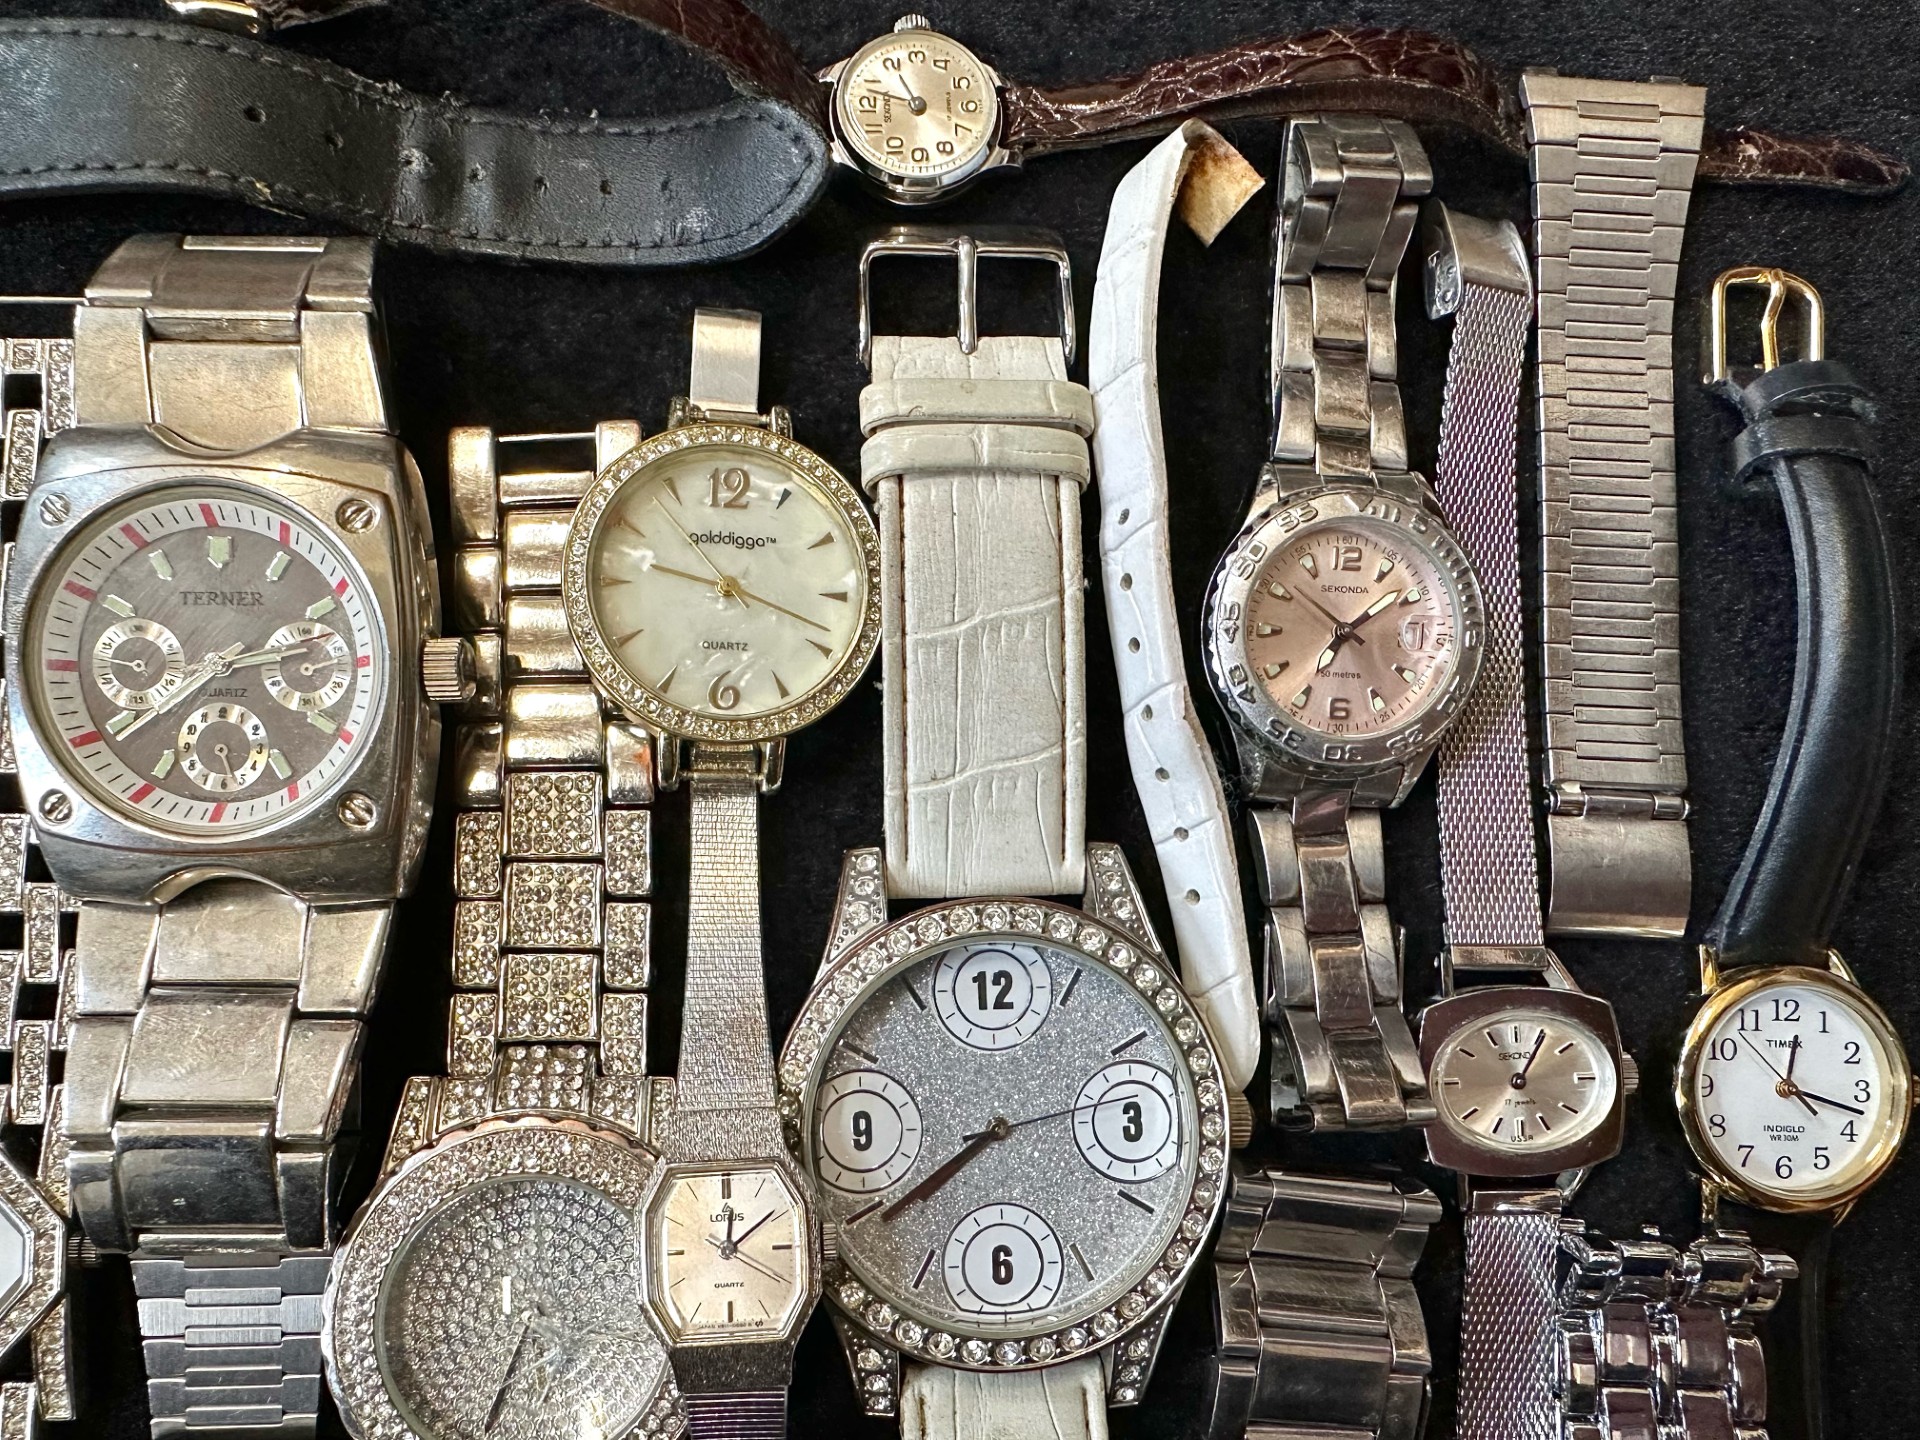 Large Collection of Wrist Watches. gents and ladies watches, lots of different makes and models. - Image 3 of 4